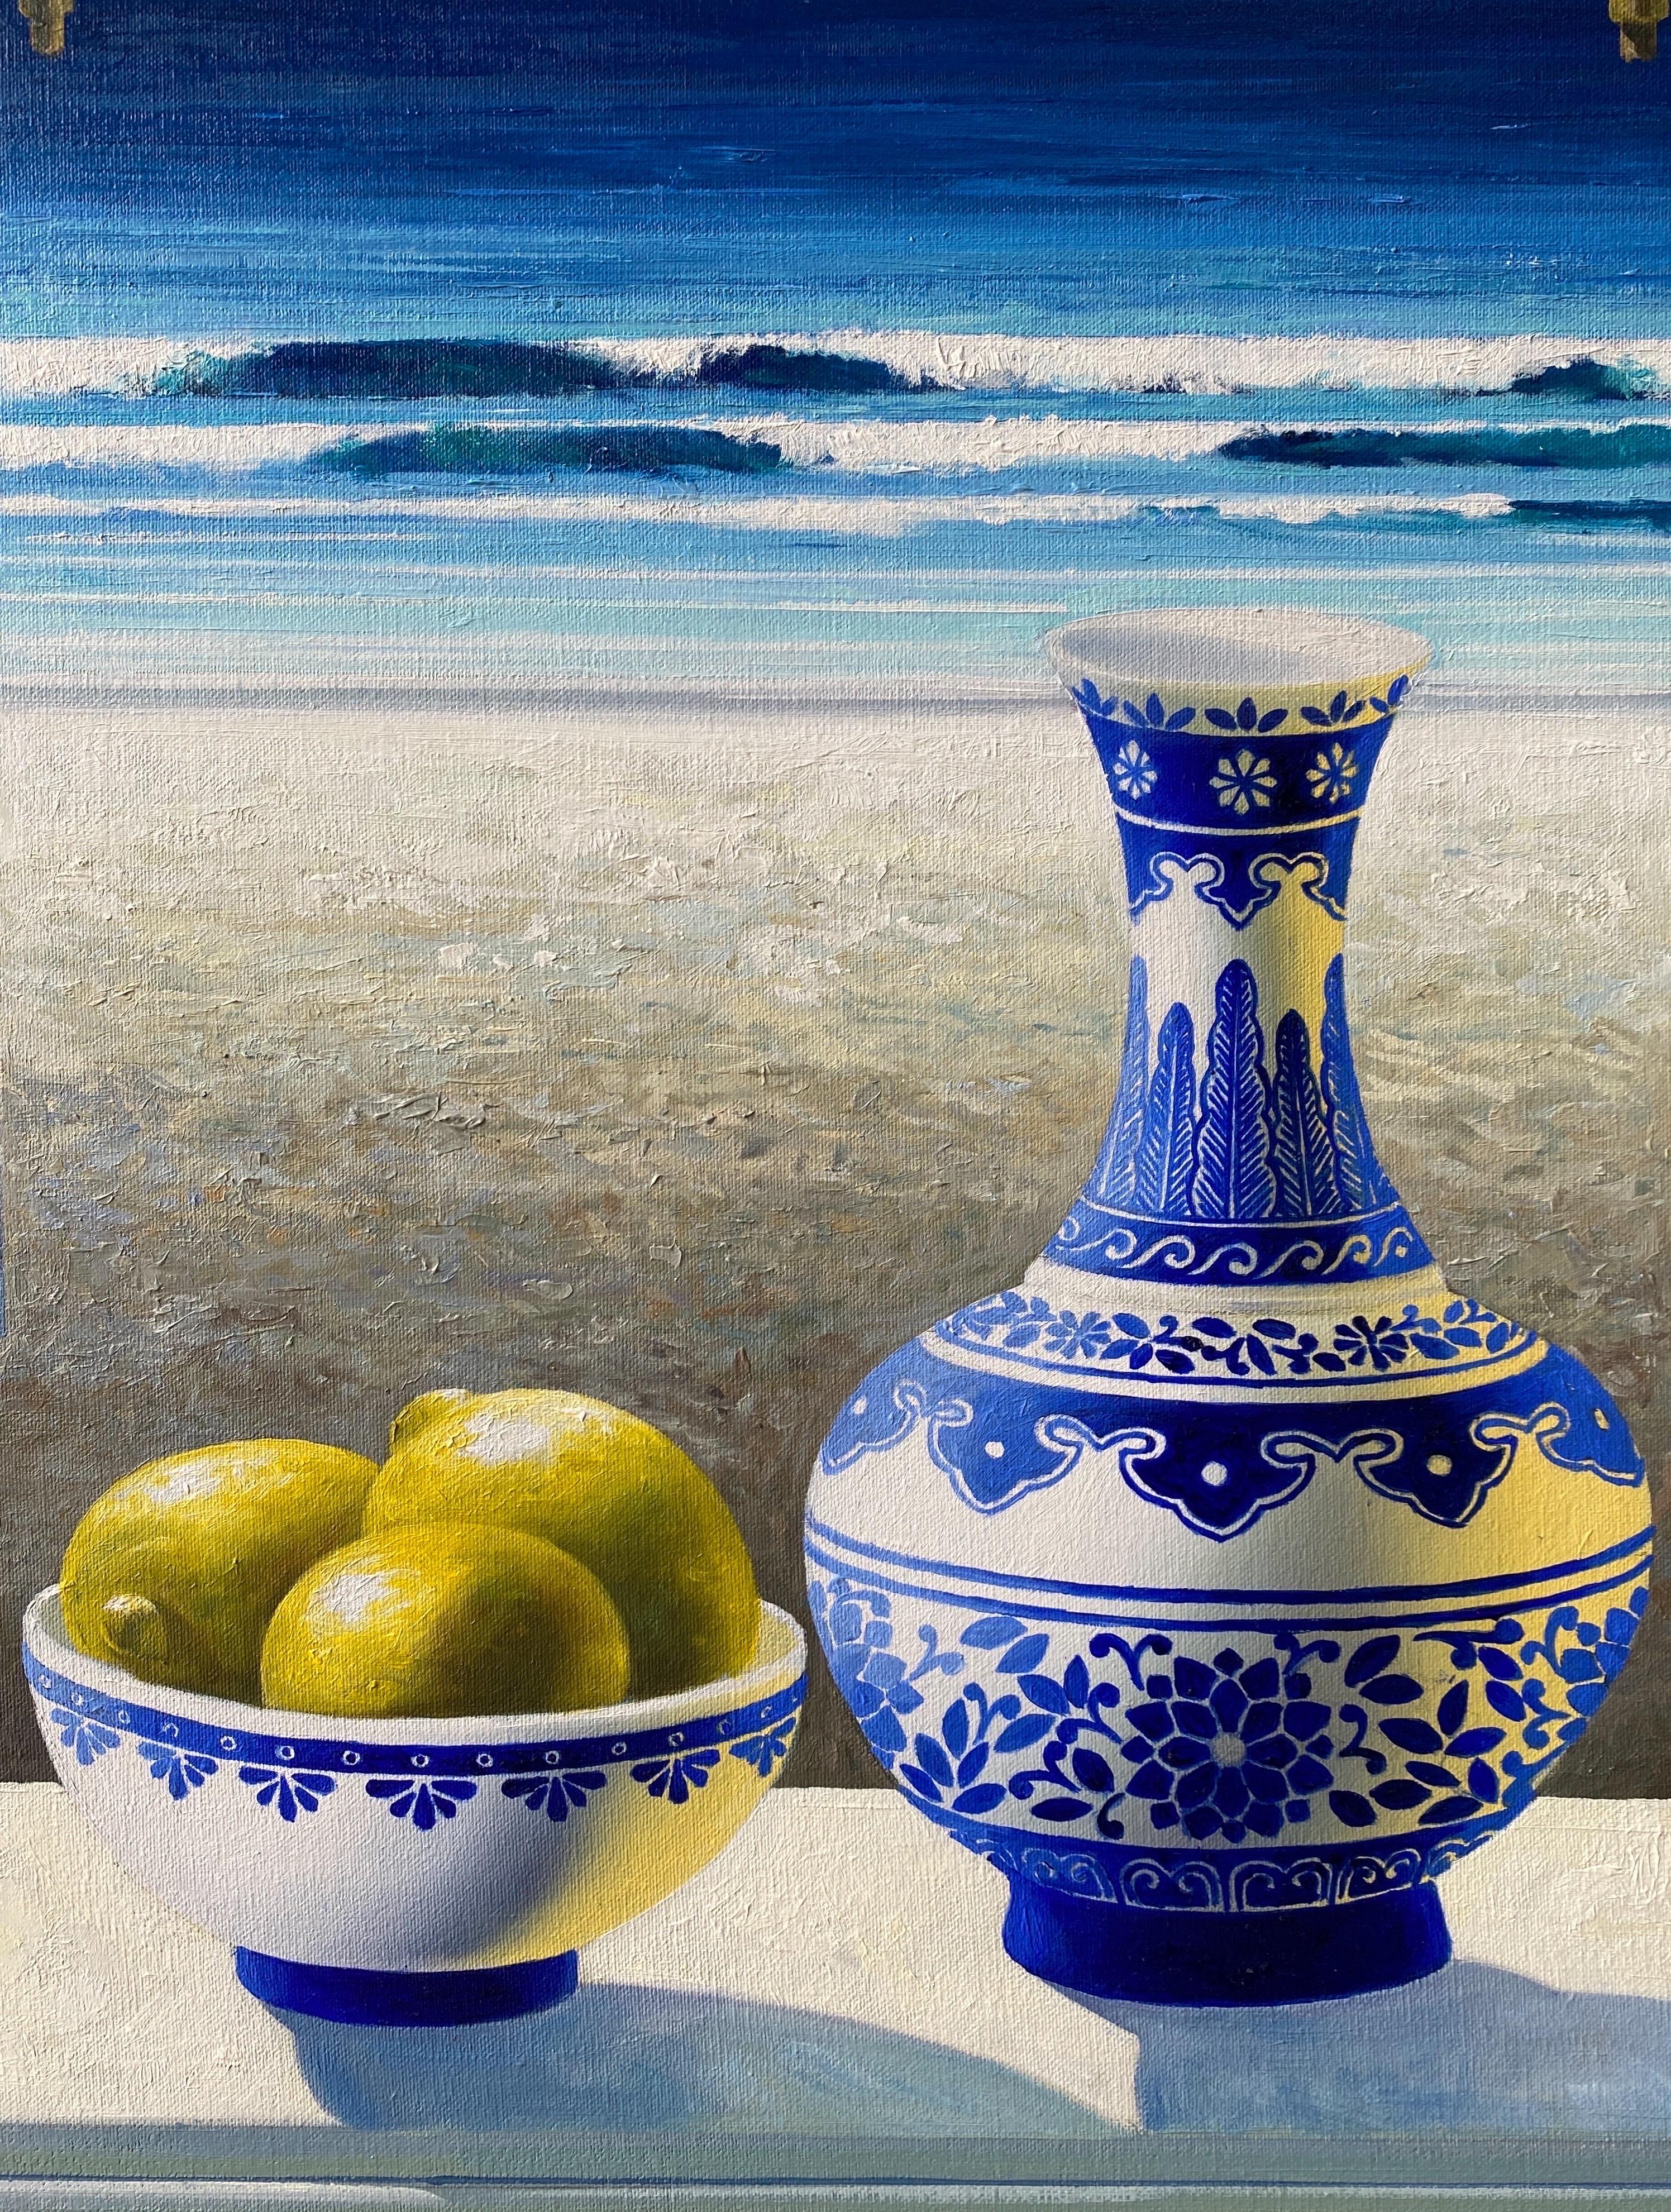 Summer view with lemons - Original oil painting - Contemporary art  - Painting by Luis Fuentes